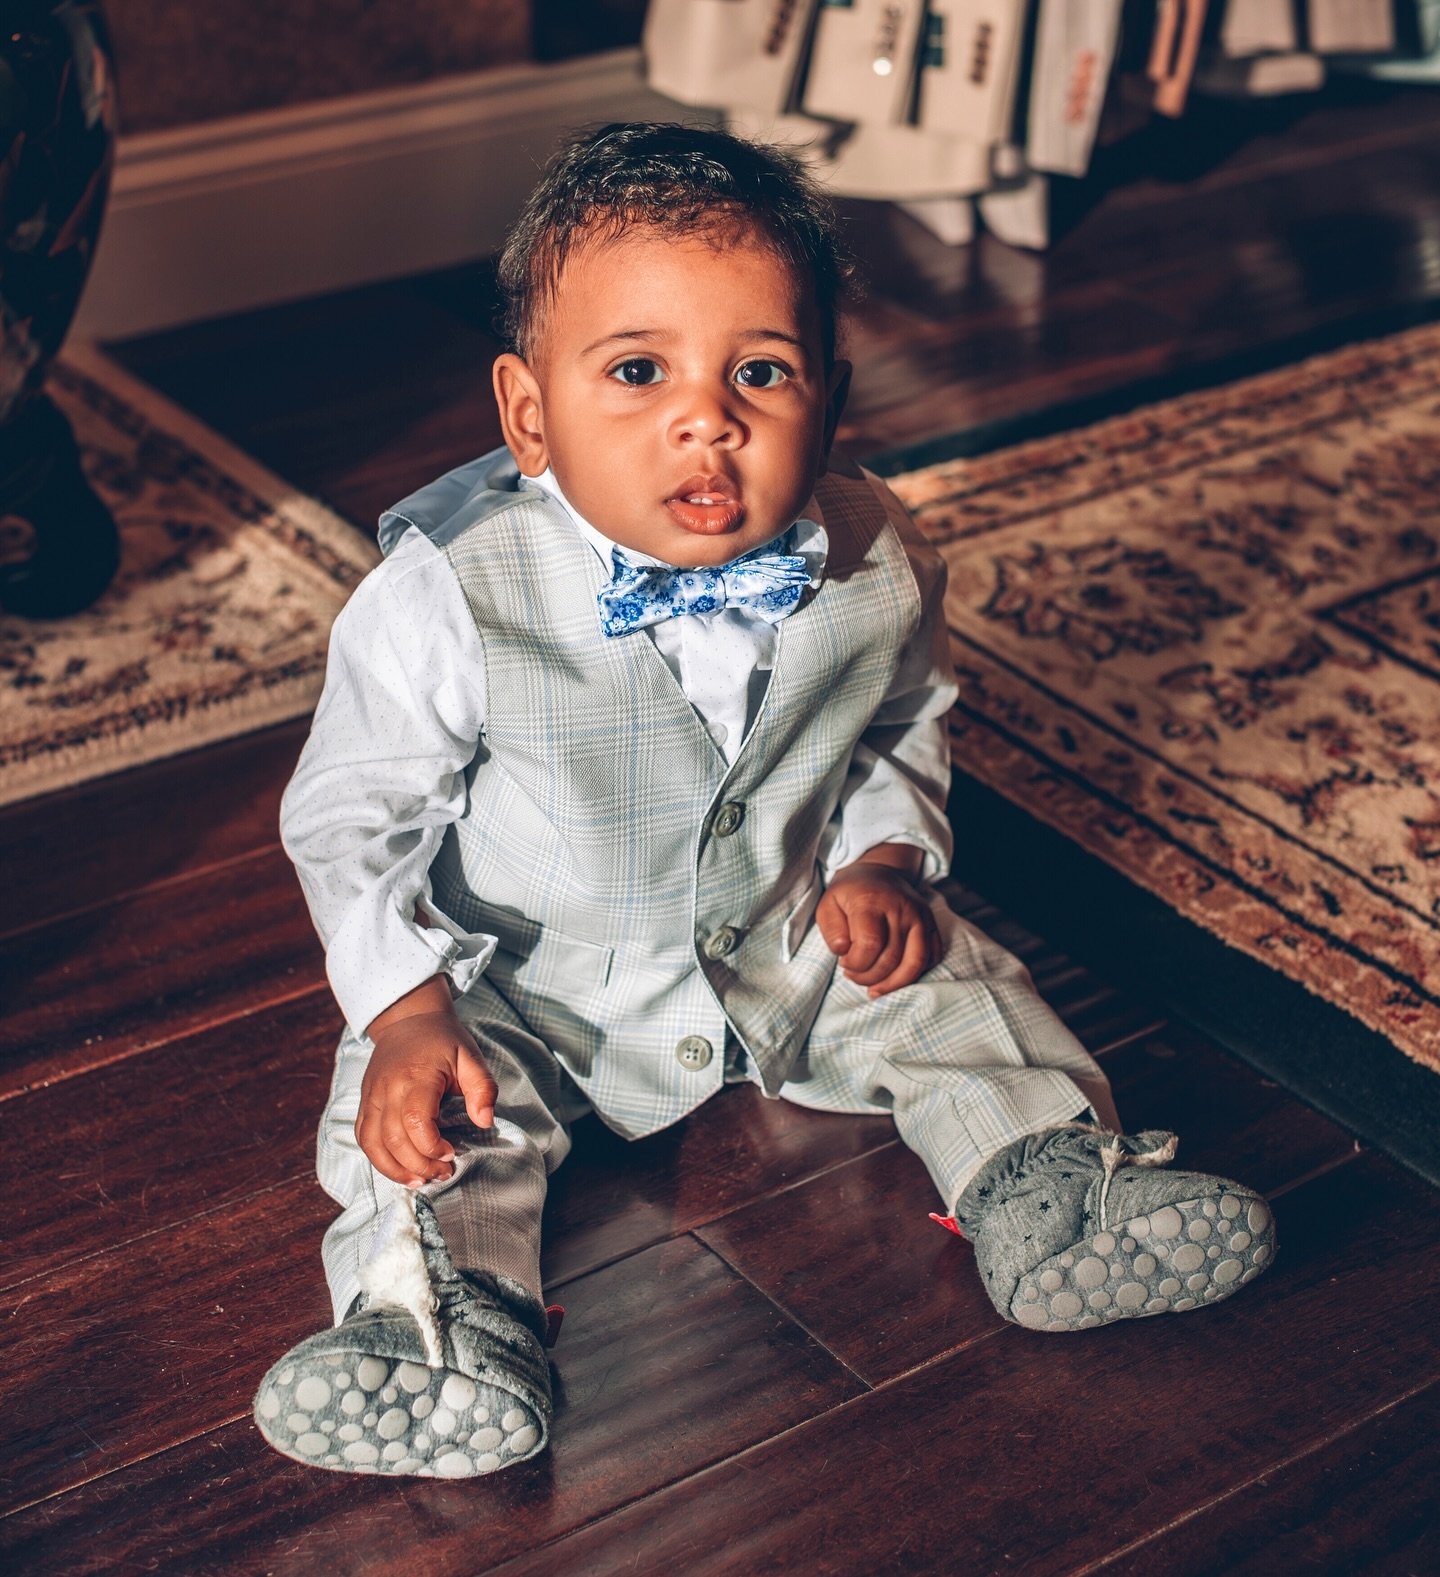 A well dressed young man, welcoming you to Monday morning &amp; a Spring sun worthy of a light grey and blue plaid ☀️ 
.
.
.
.
.
#onoreclothing #onore #bluemonday #expertsinfit #welldressed #plaidsuits #babiesinsuits #classicstyles #lookinggoodfeelin